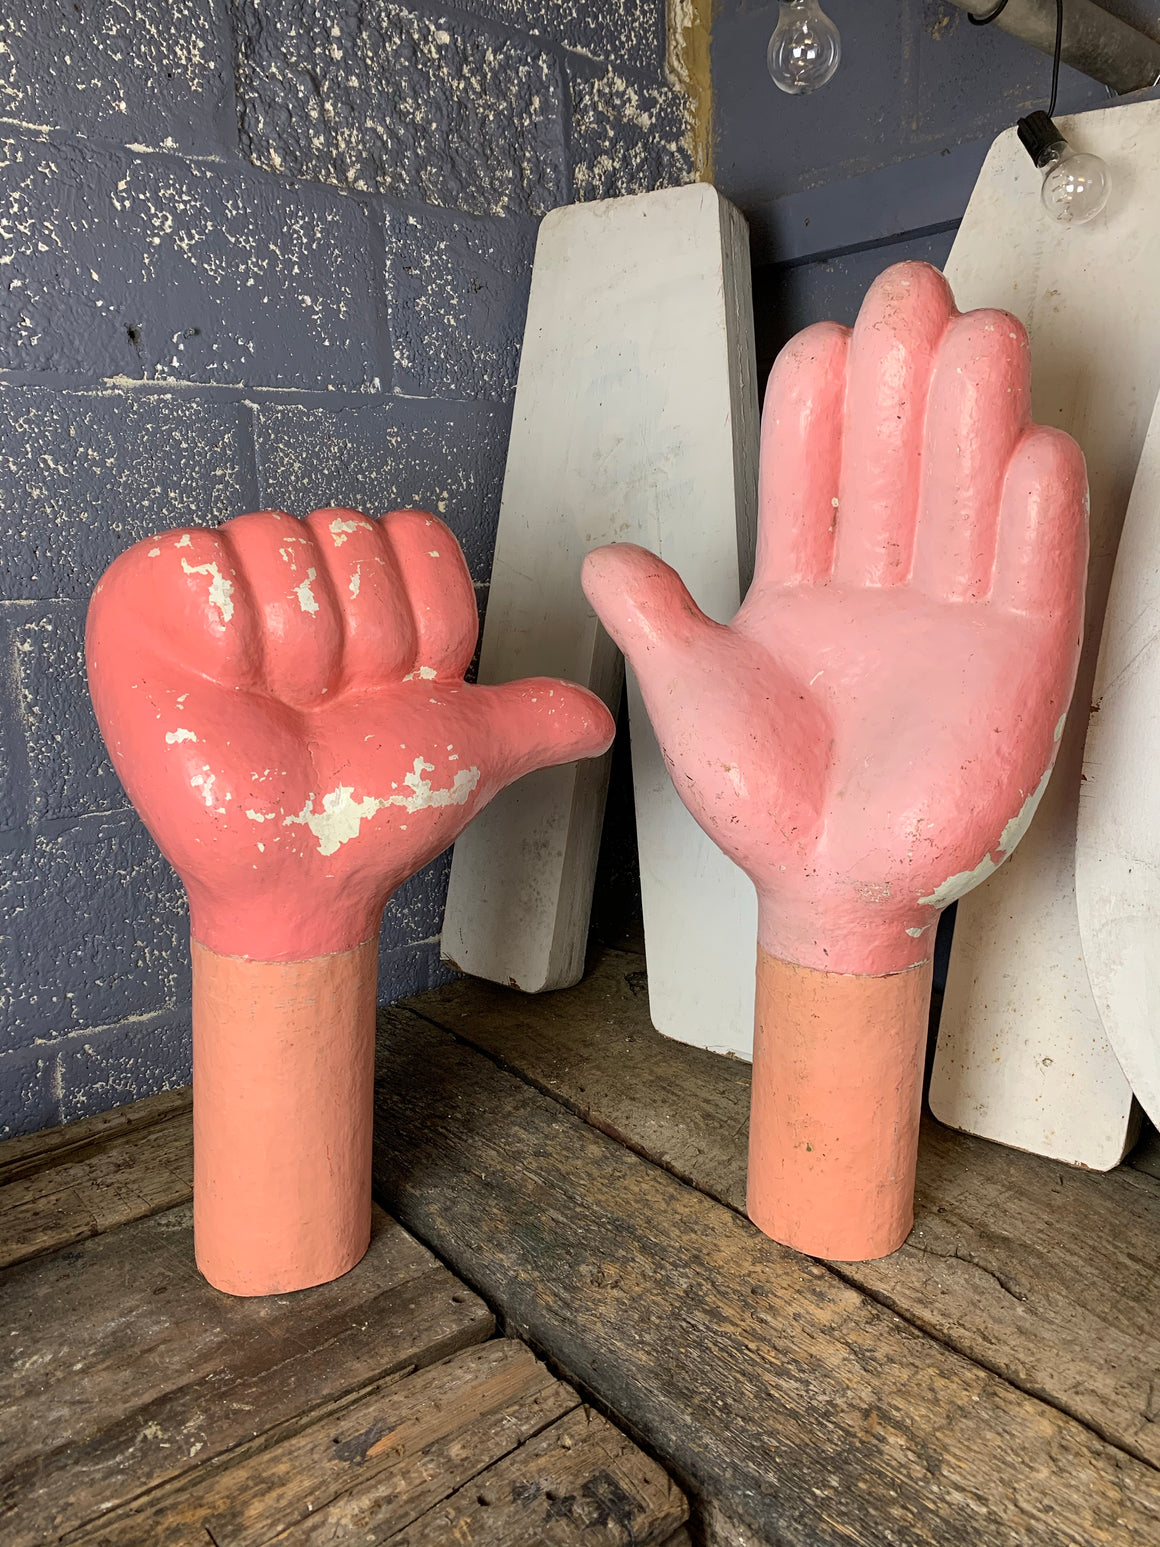 A large pink palm fairground hand